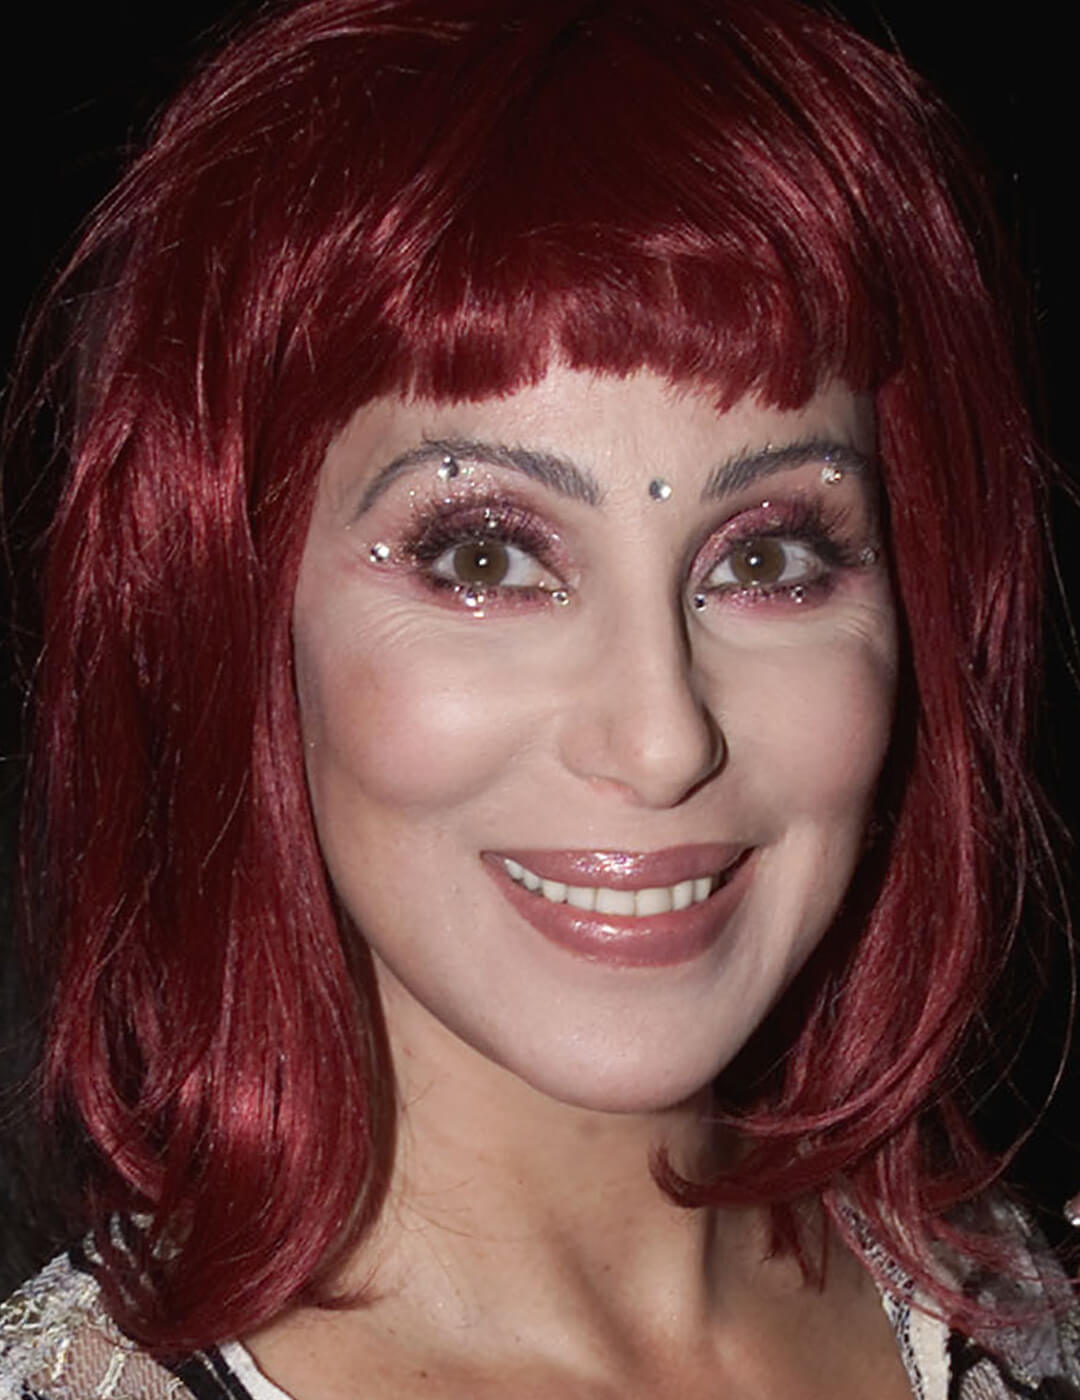 Younger Cher rocking burgundy hair, burgundy eyeshadow with gemstones, and nude lips